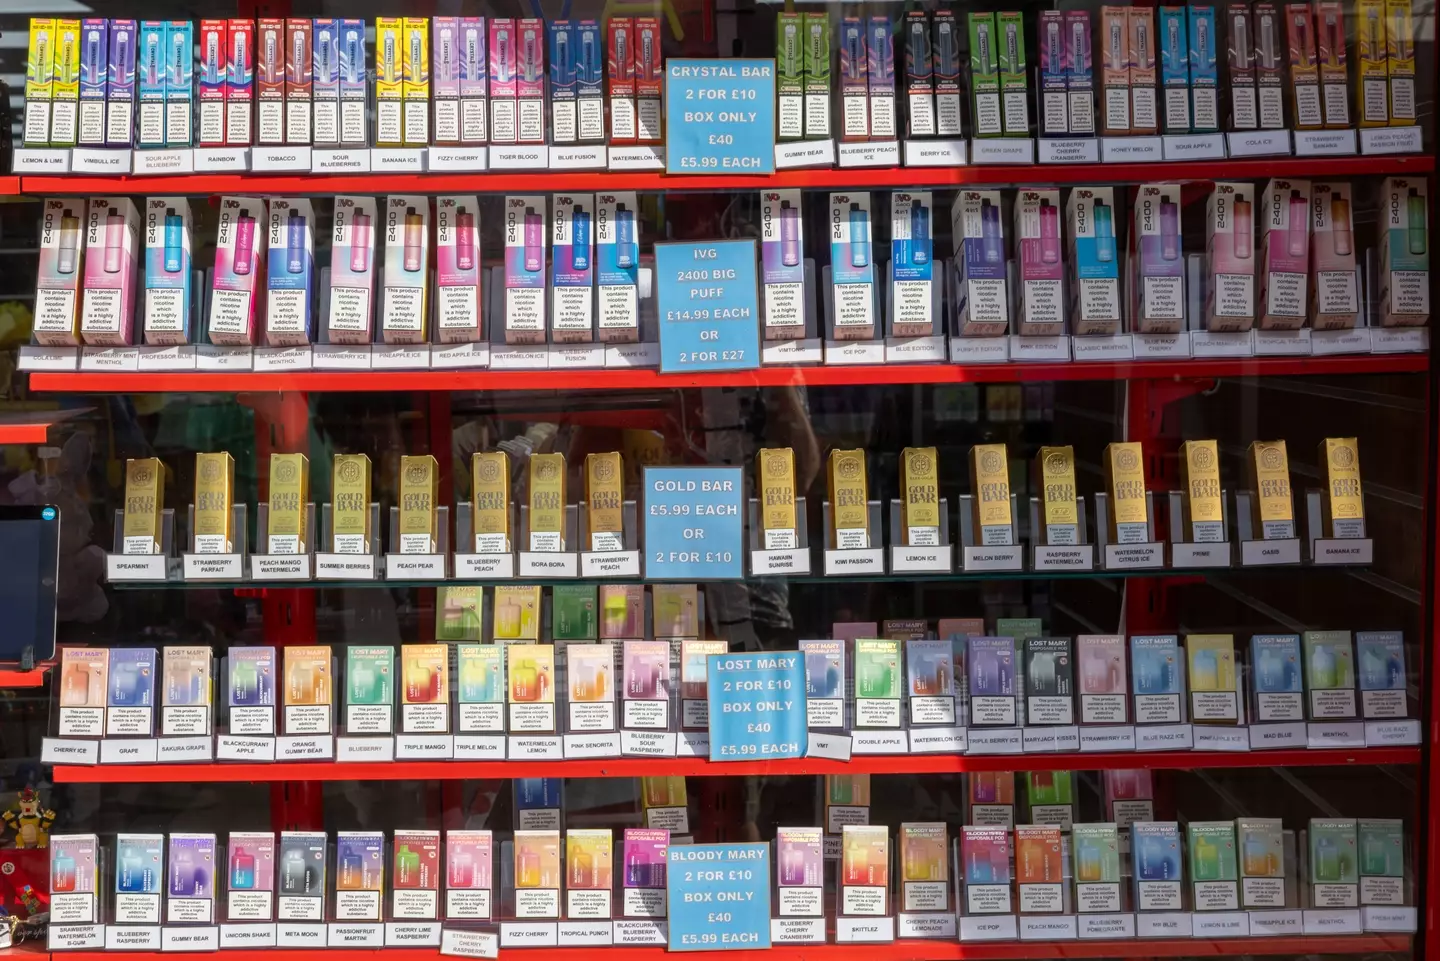 E-cigarettes might be moved off the shelves and go behind the counter like cigarettes.